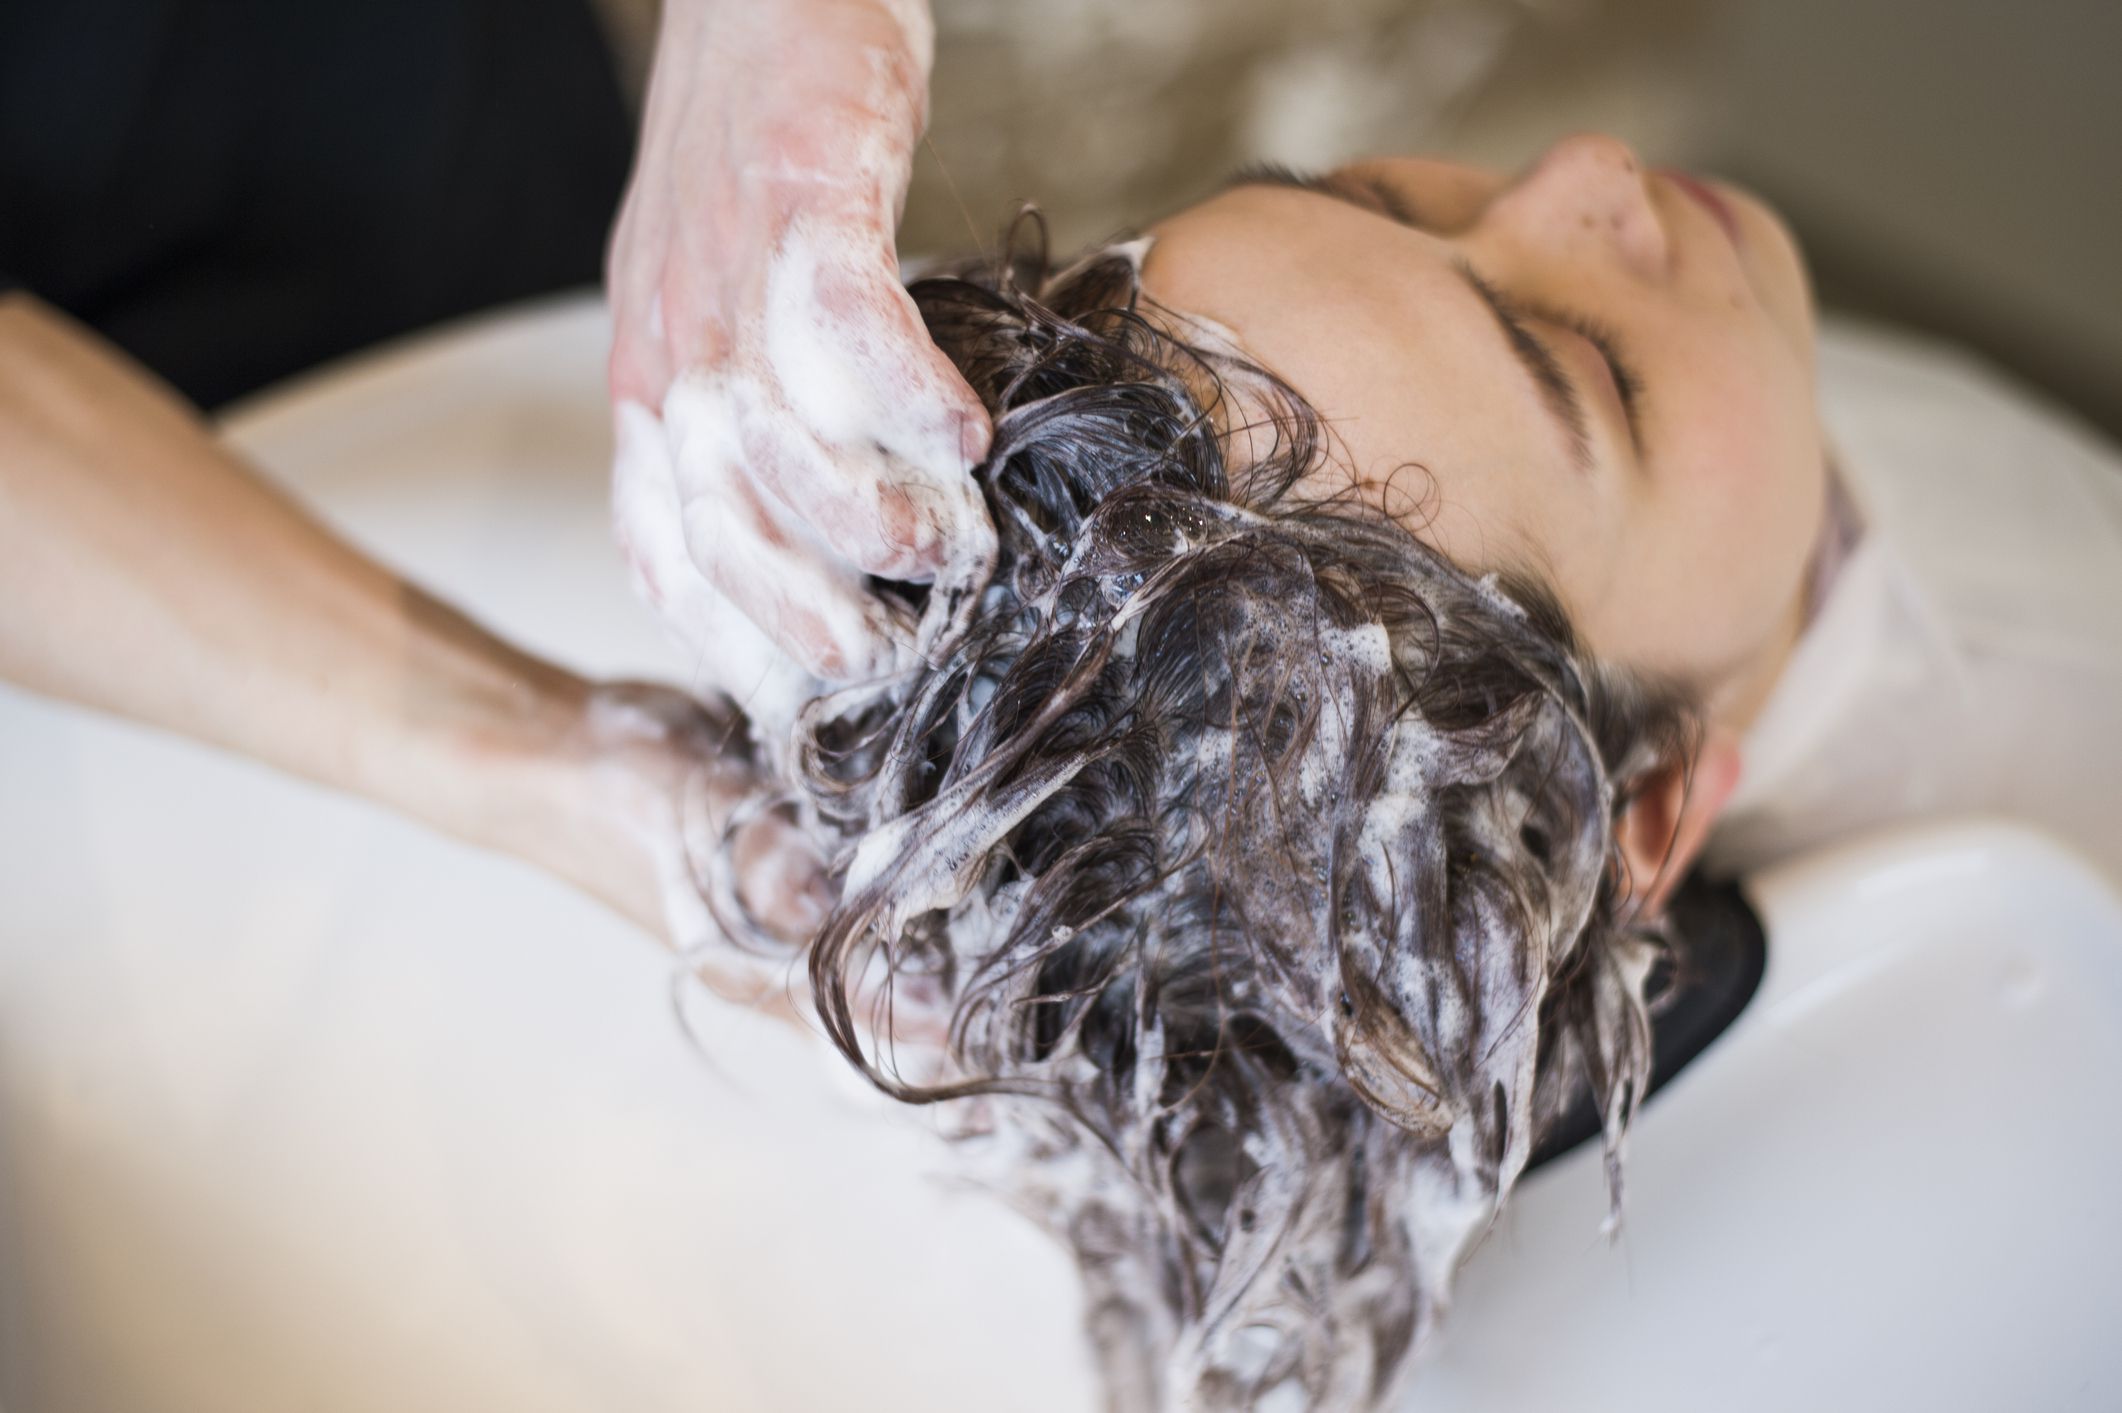 How washing hair taught me to be a better doctor